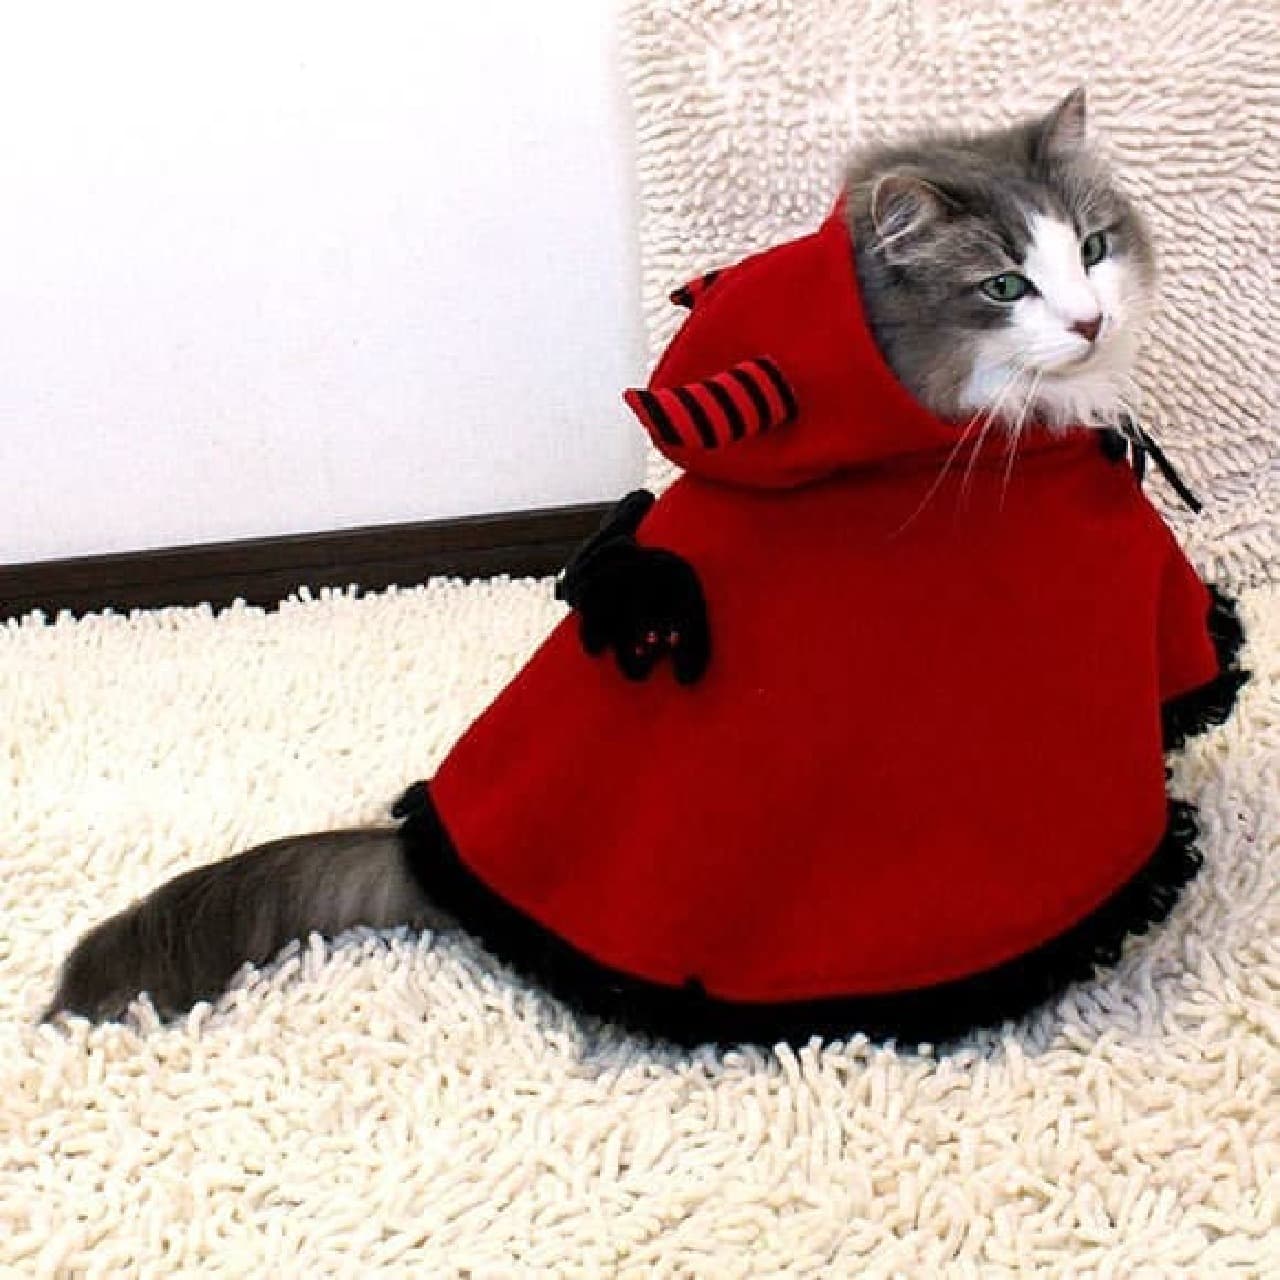 It's on sale at "iDog & iCat", a Halloween costume for pets.